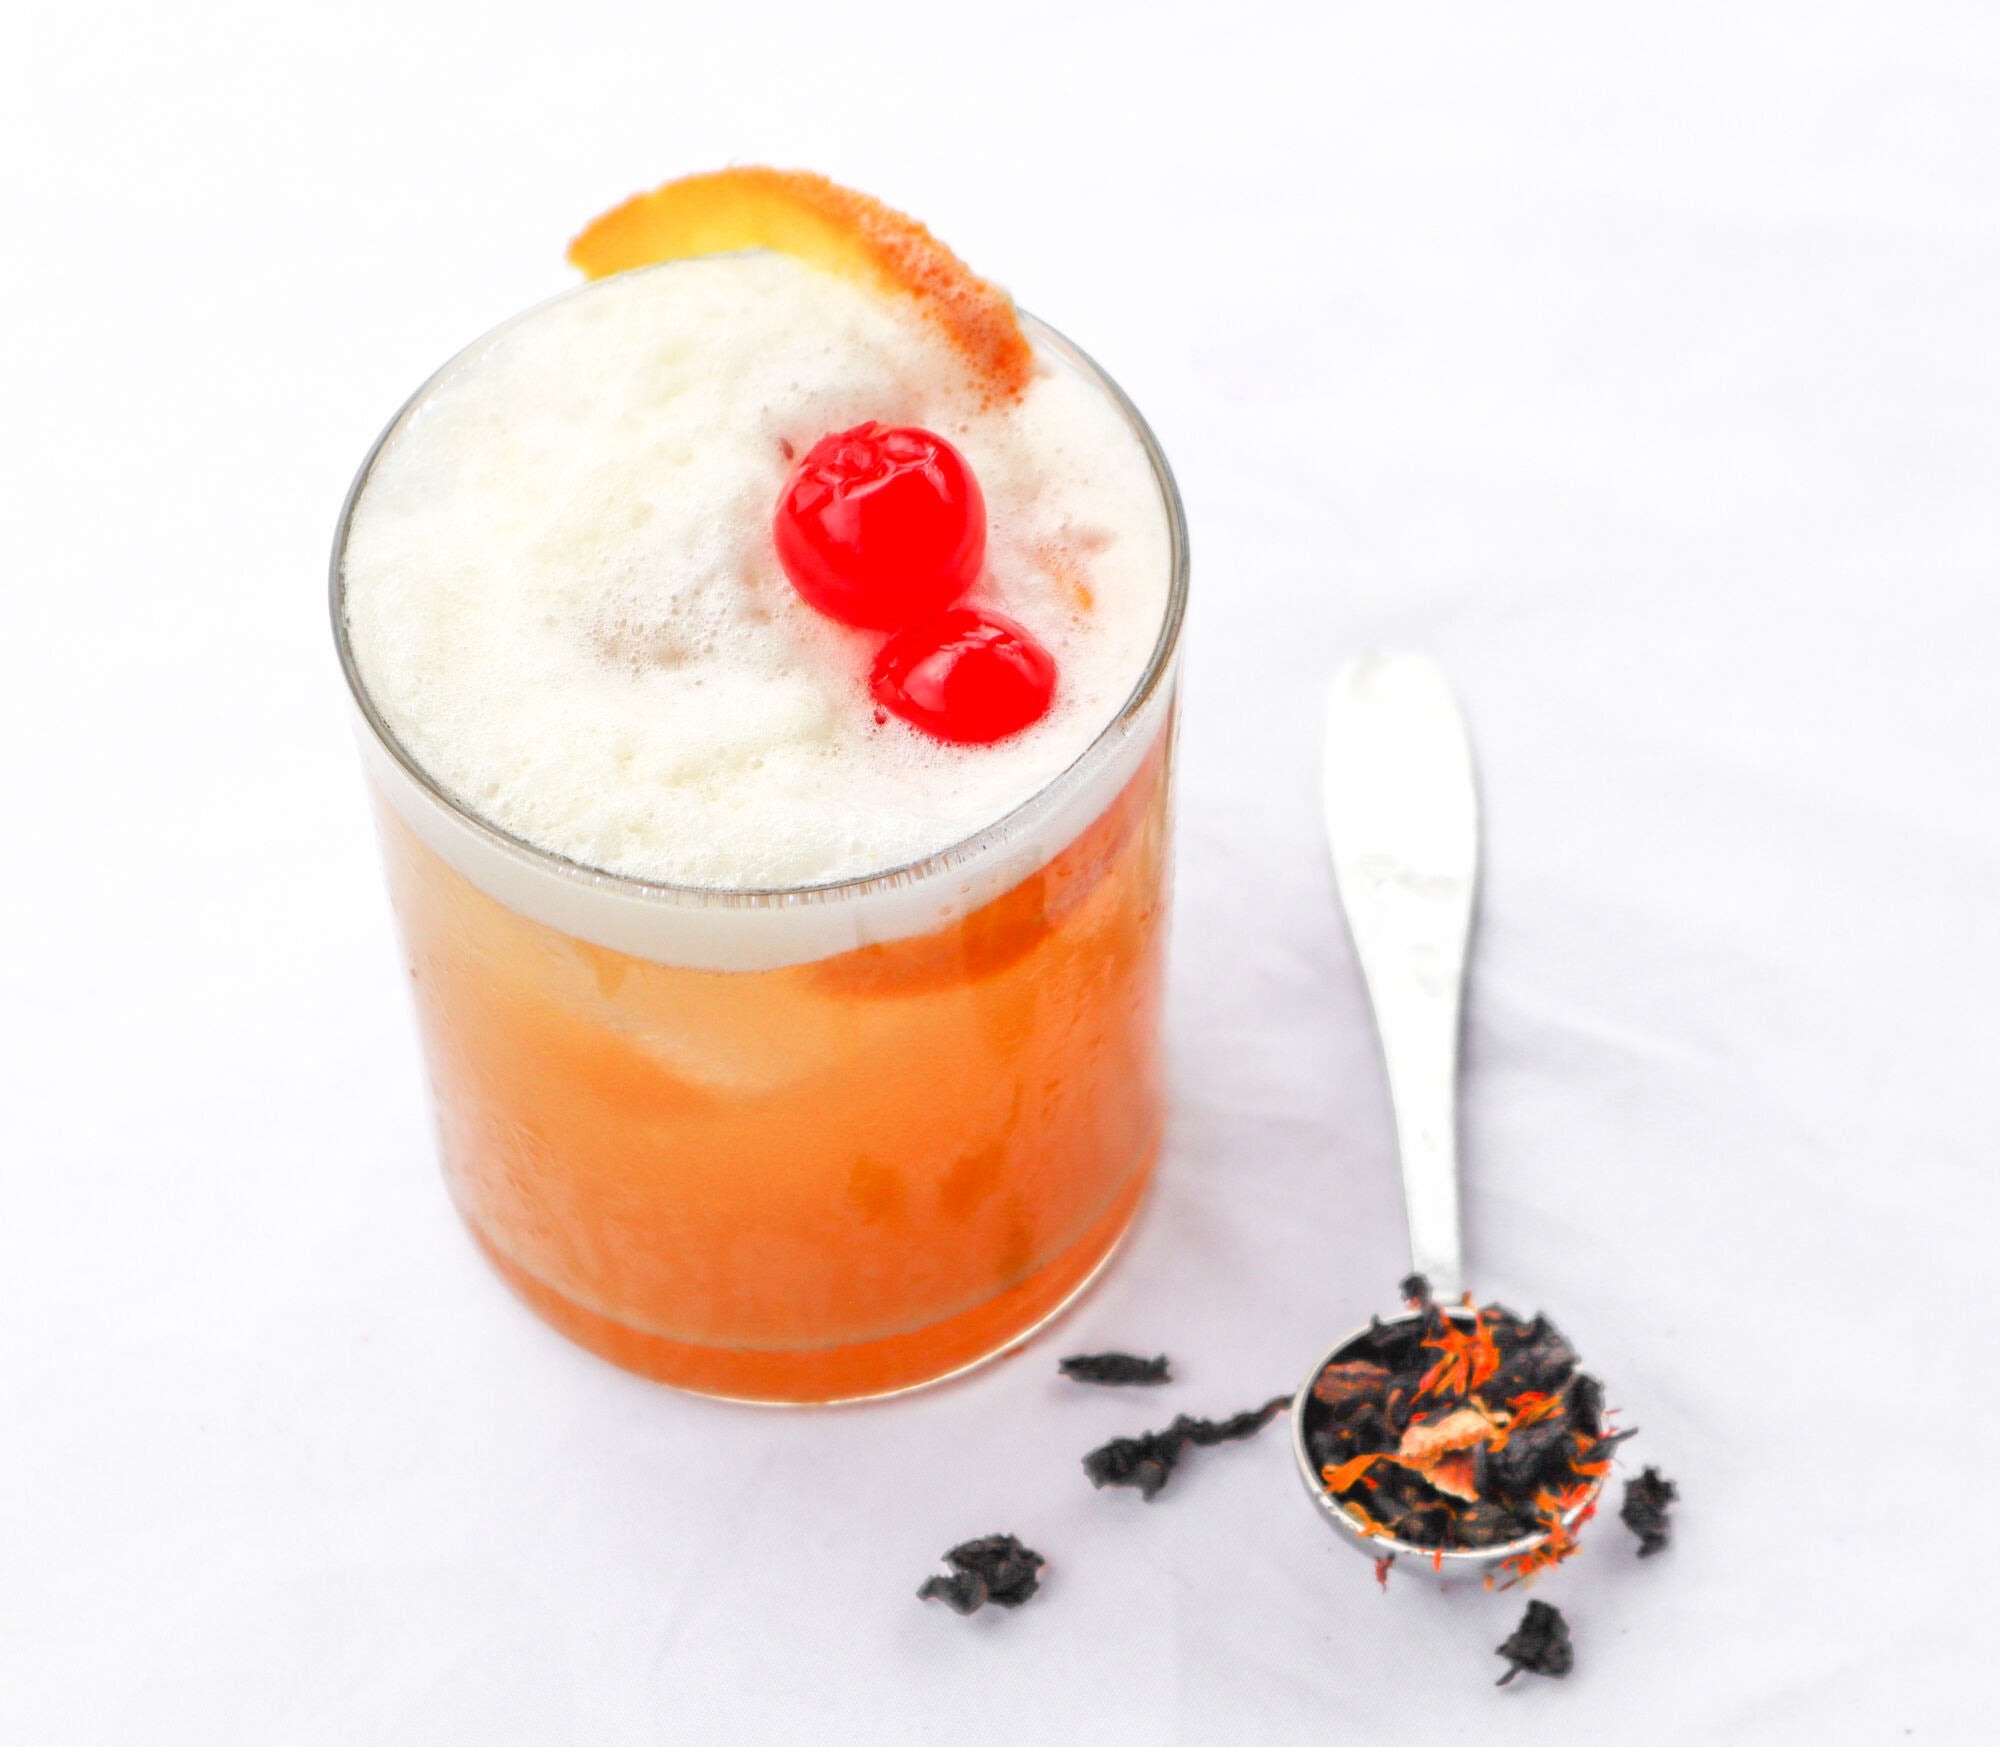 CREATE A DREAMY TREAT: THE DREAMSICLE SOUR